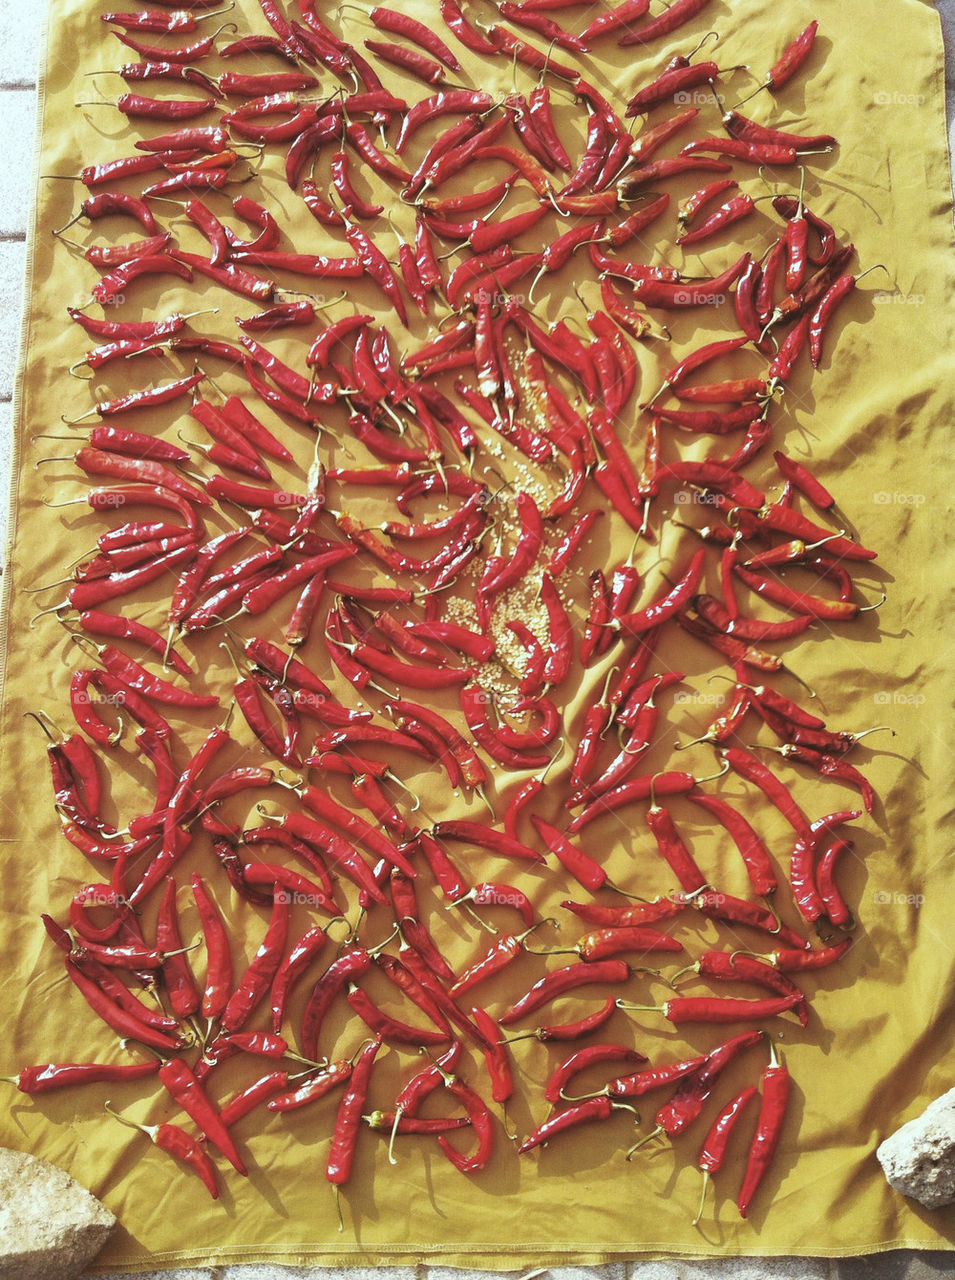 Drying out the chili peppers in the hot sun.